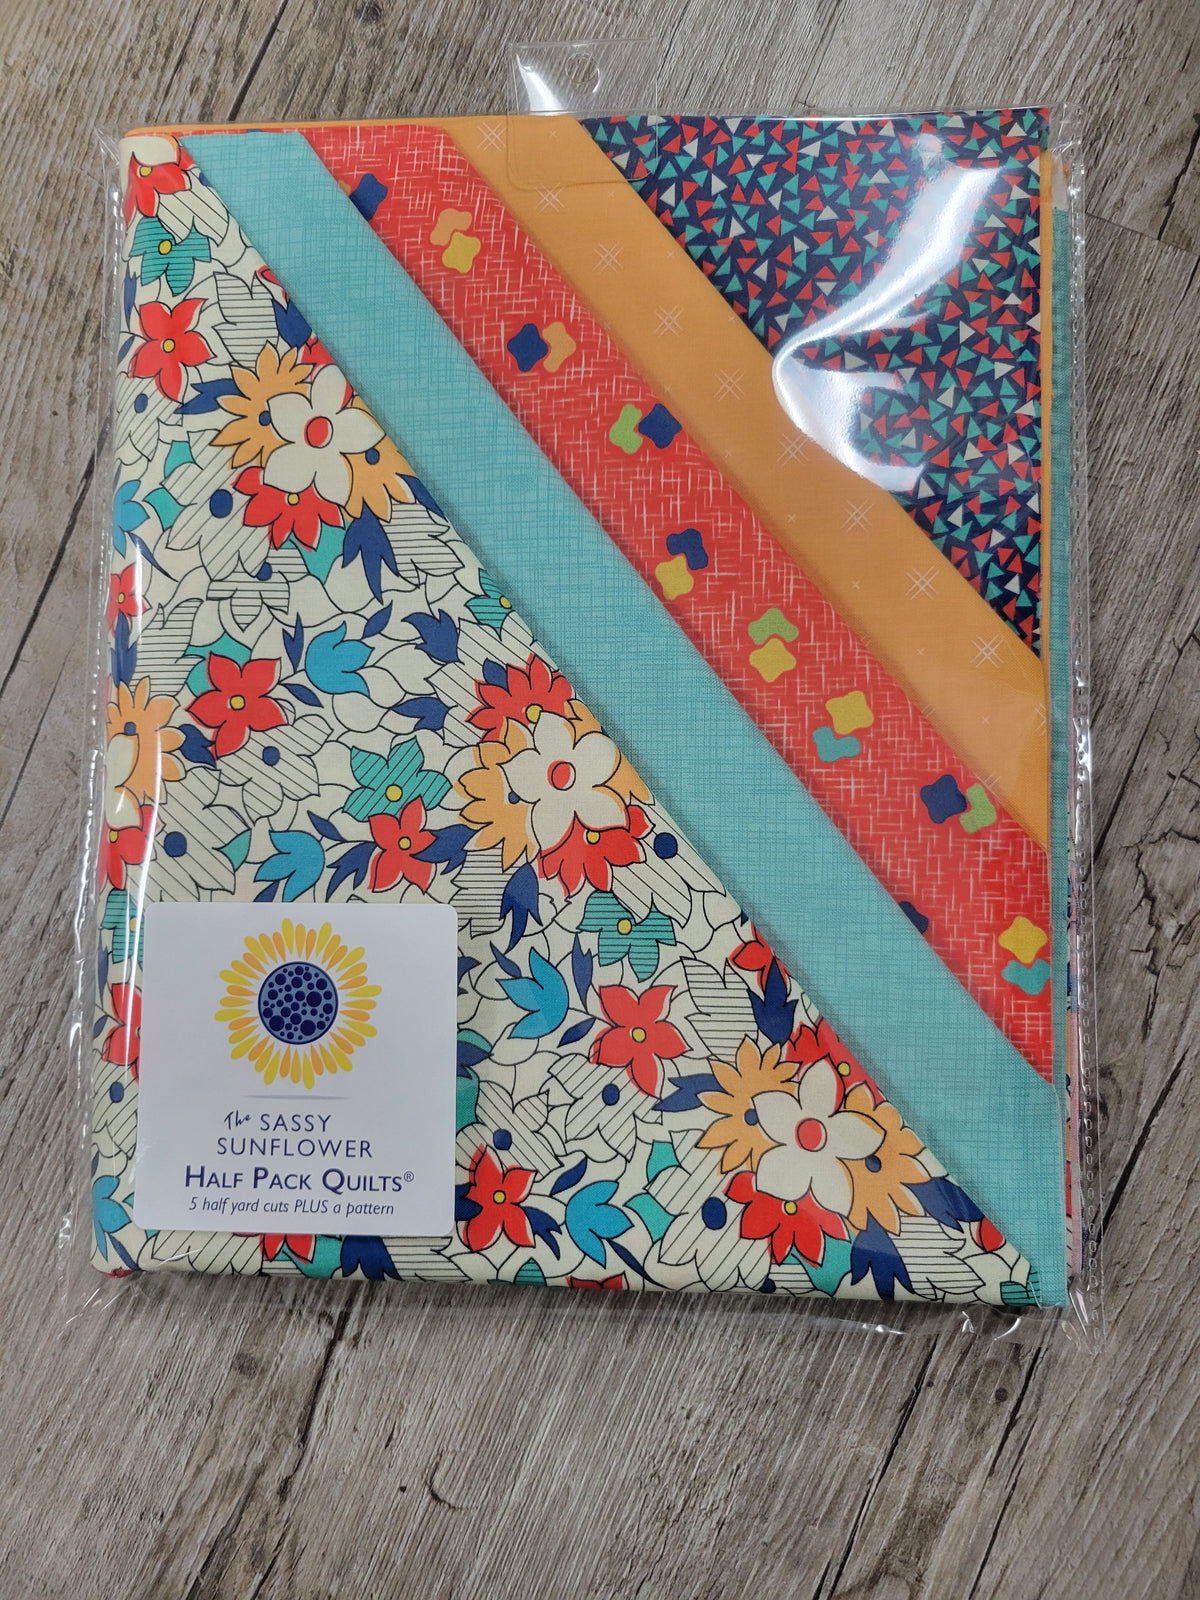 Audrey Delight - The Sassy Sunflower Half Pack Quilts™ Kit